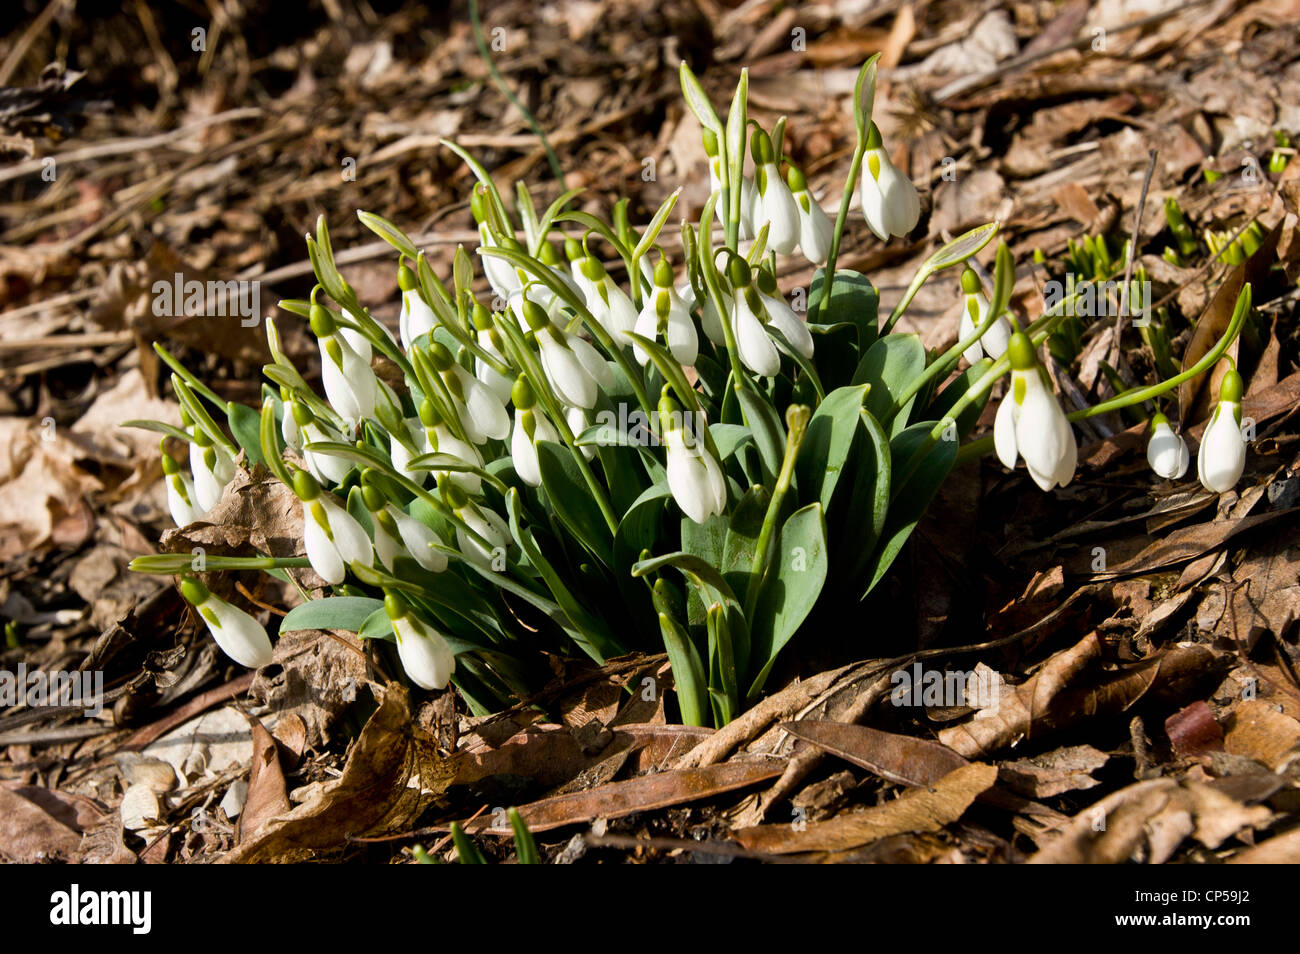 Group of Common snowdrops, Galanthus nivalis growing on the lawn in early Spring Stock Photo